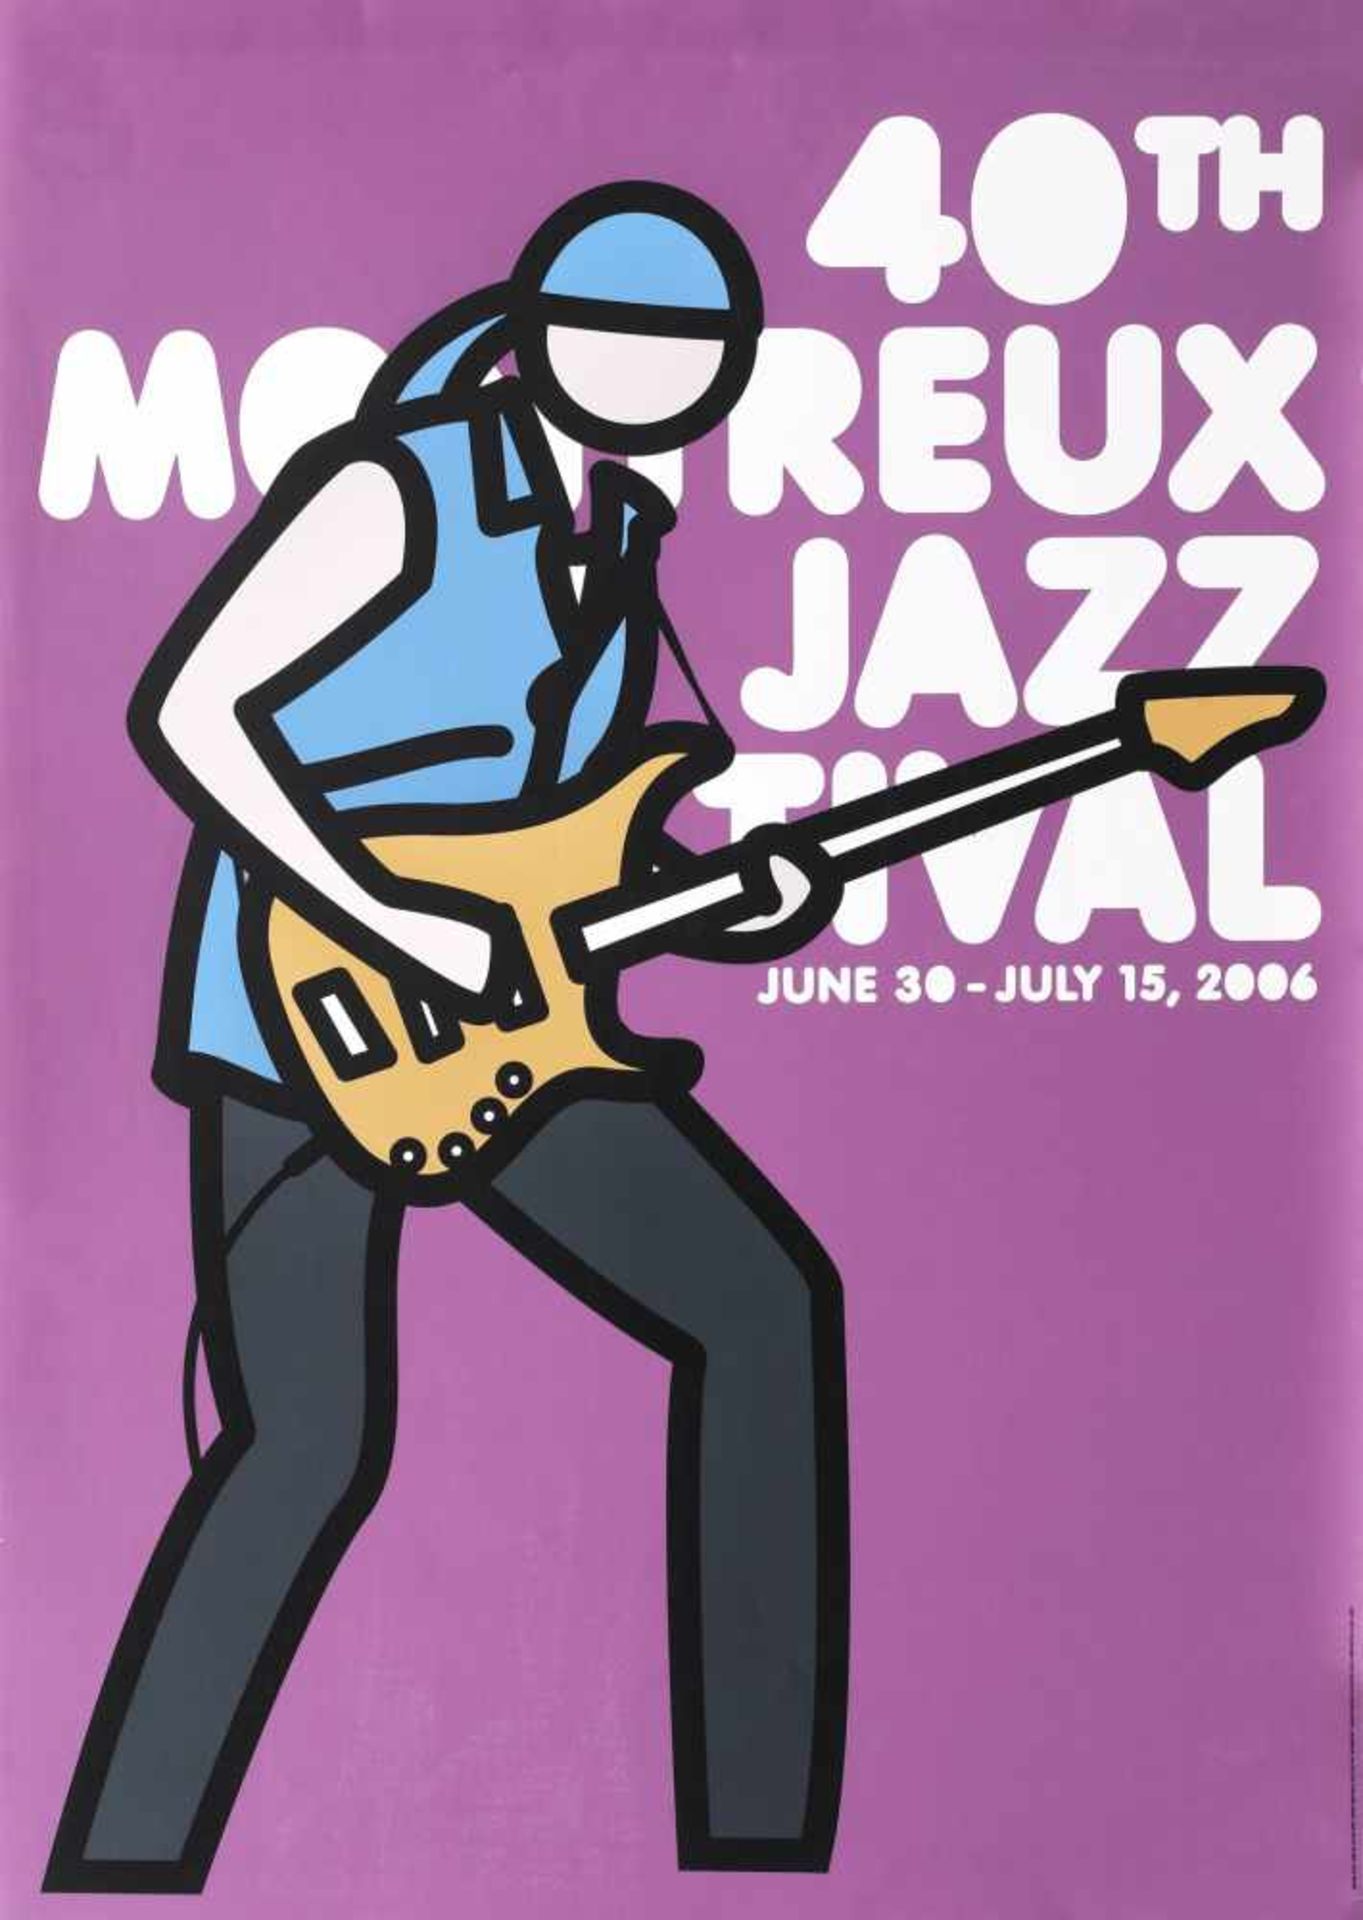 Montreux Jaz Festival - poster illustrated by Keith Haring, 2006